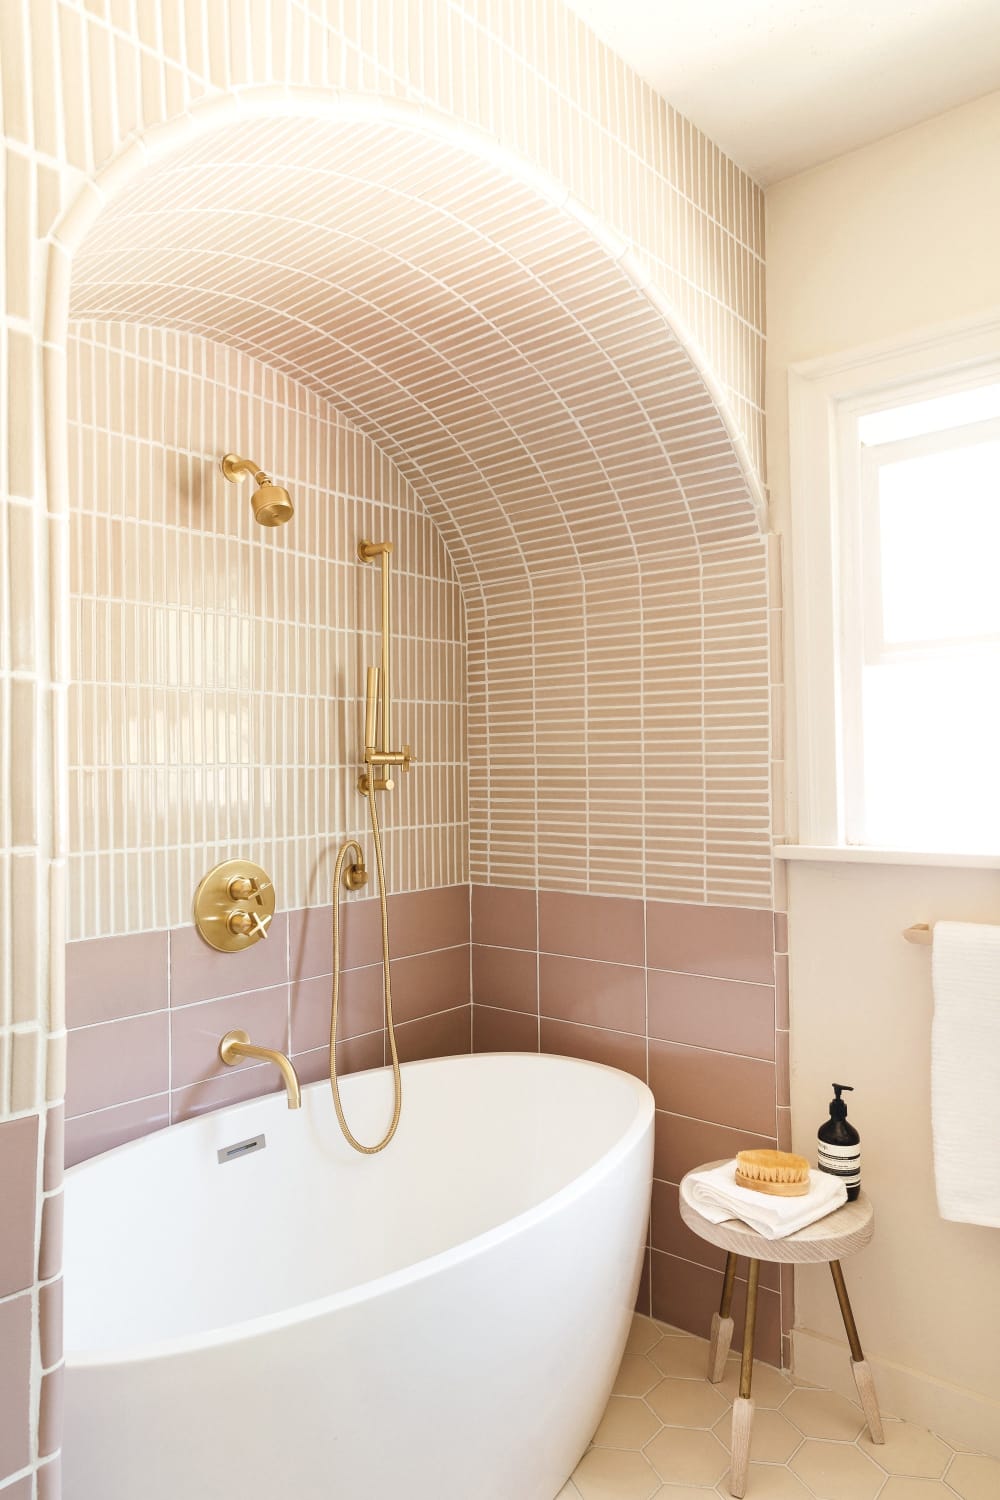 Arched bath alcove with brass fixtures in a two-toned tiled bathroom renovation of a 1920s house, Los Angeles